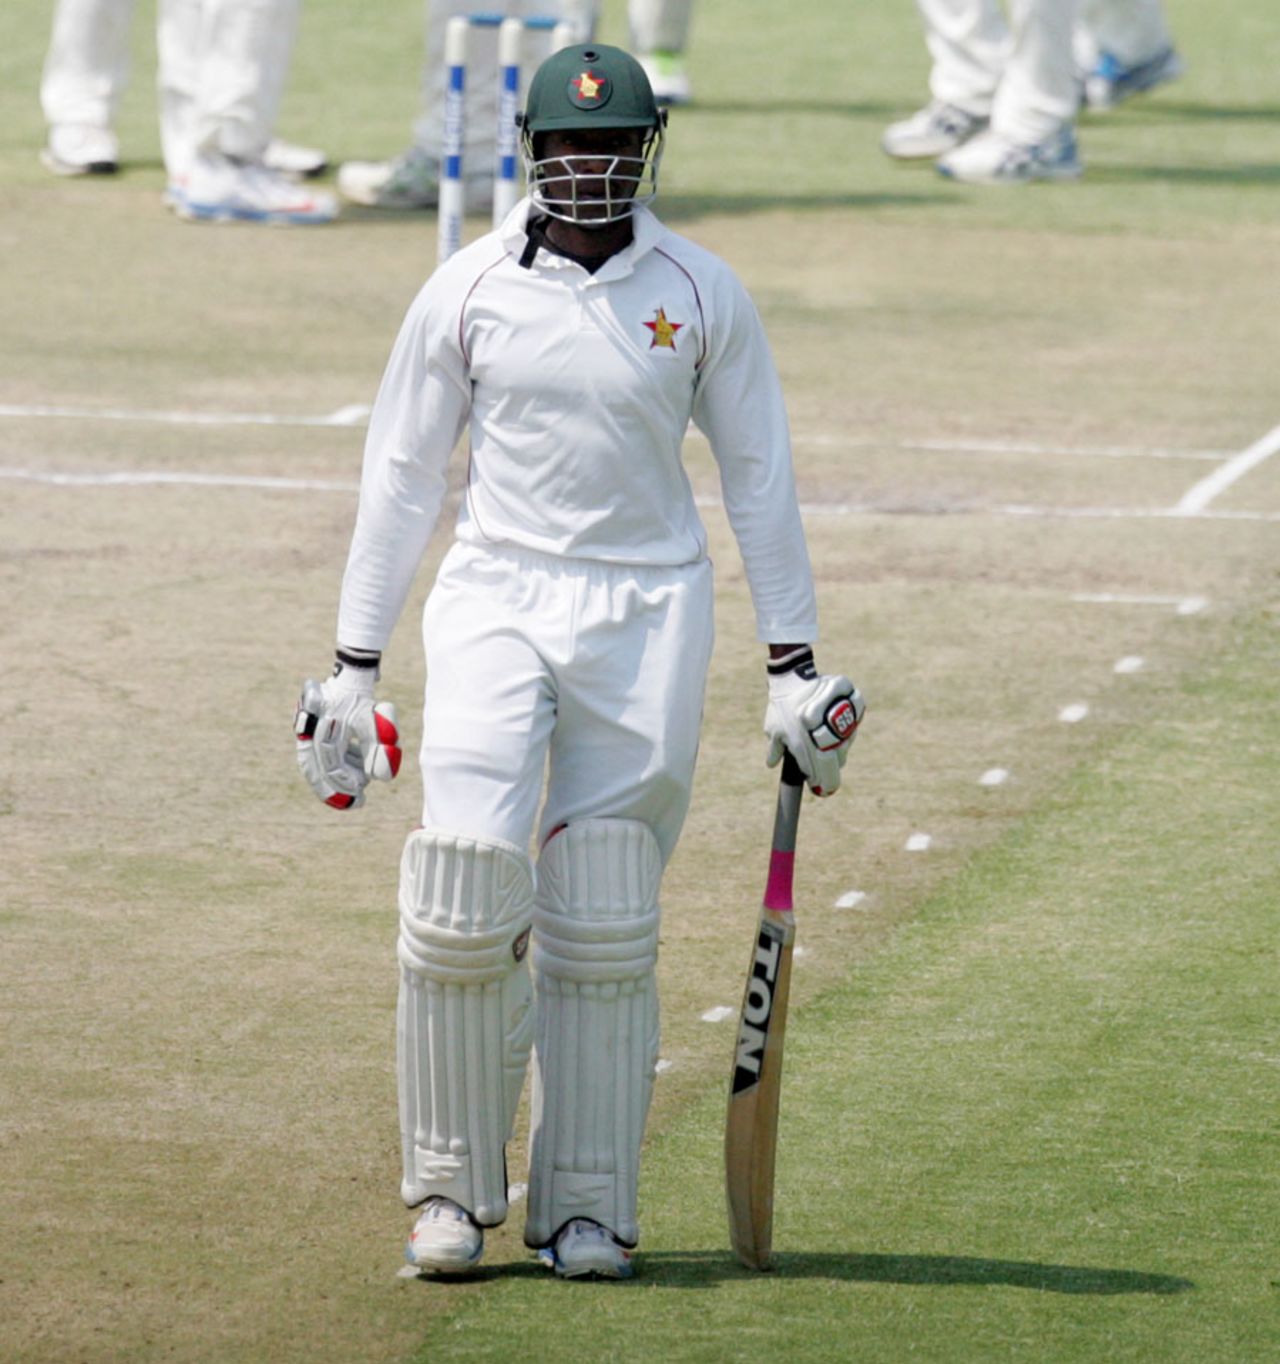 Vusi Sibanda walks off the pitch after losing his wicket, Zimbabwe v Pakistan, 2nd Test, Harare, 4th day, September 13, 2013